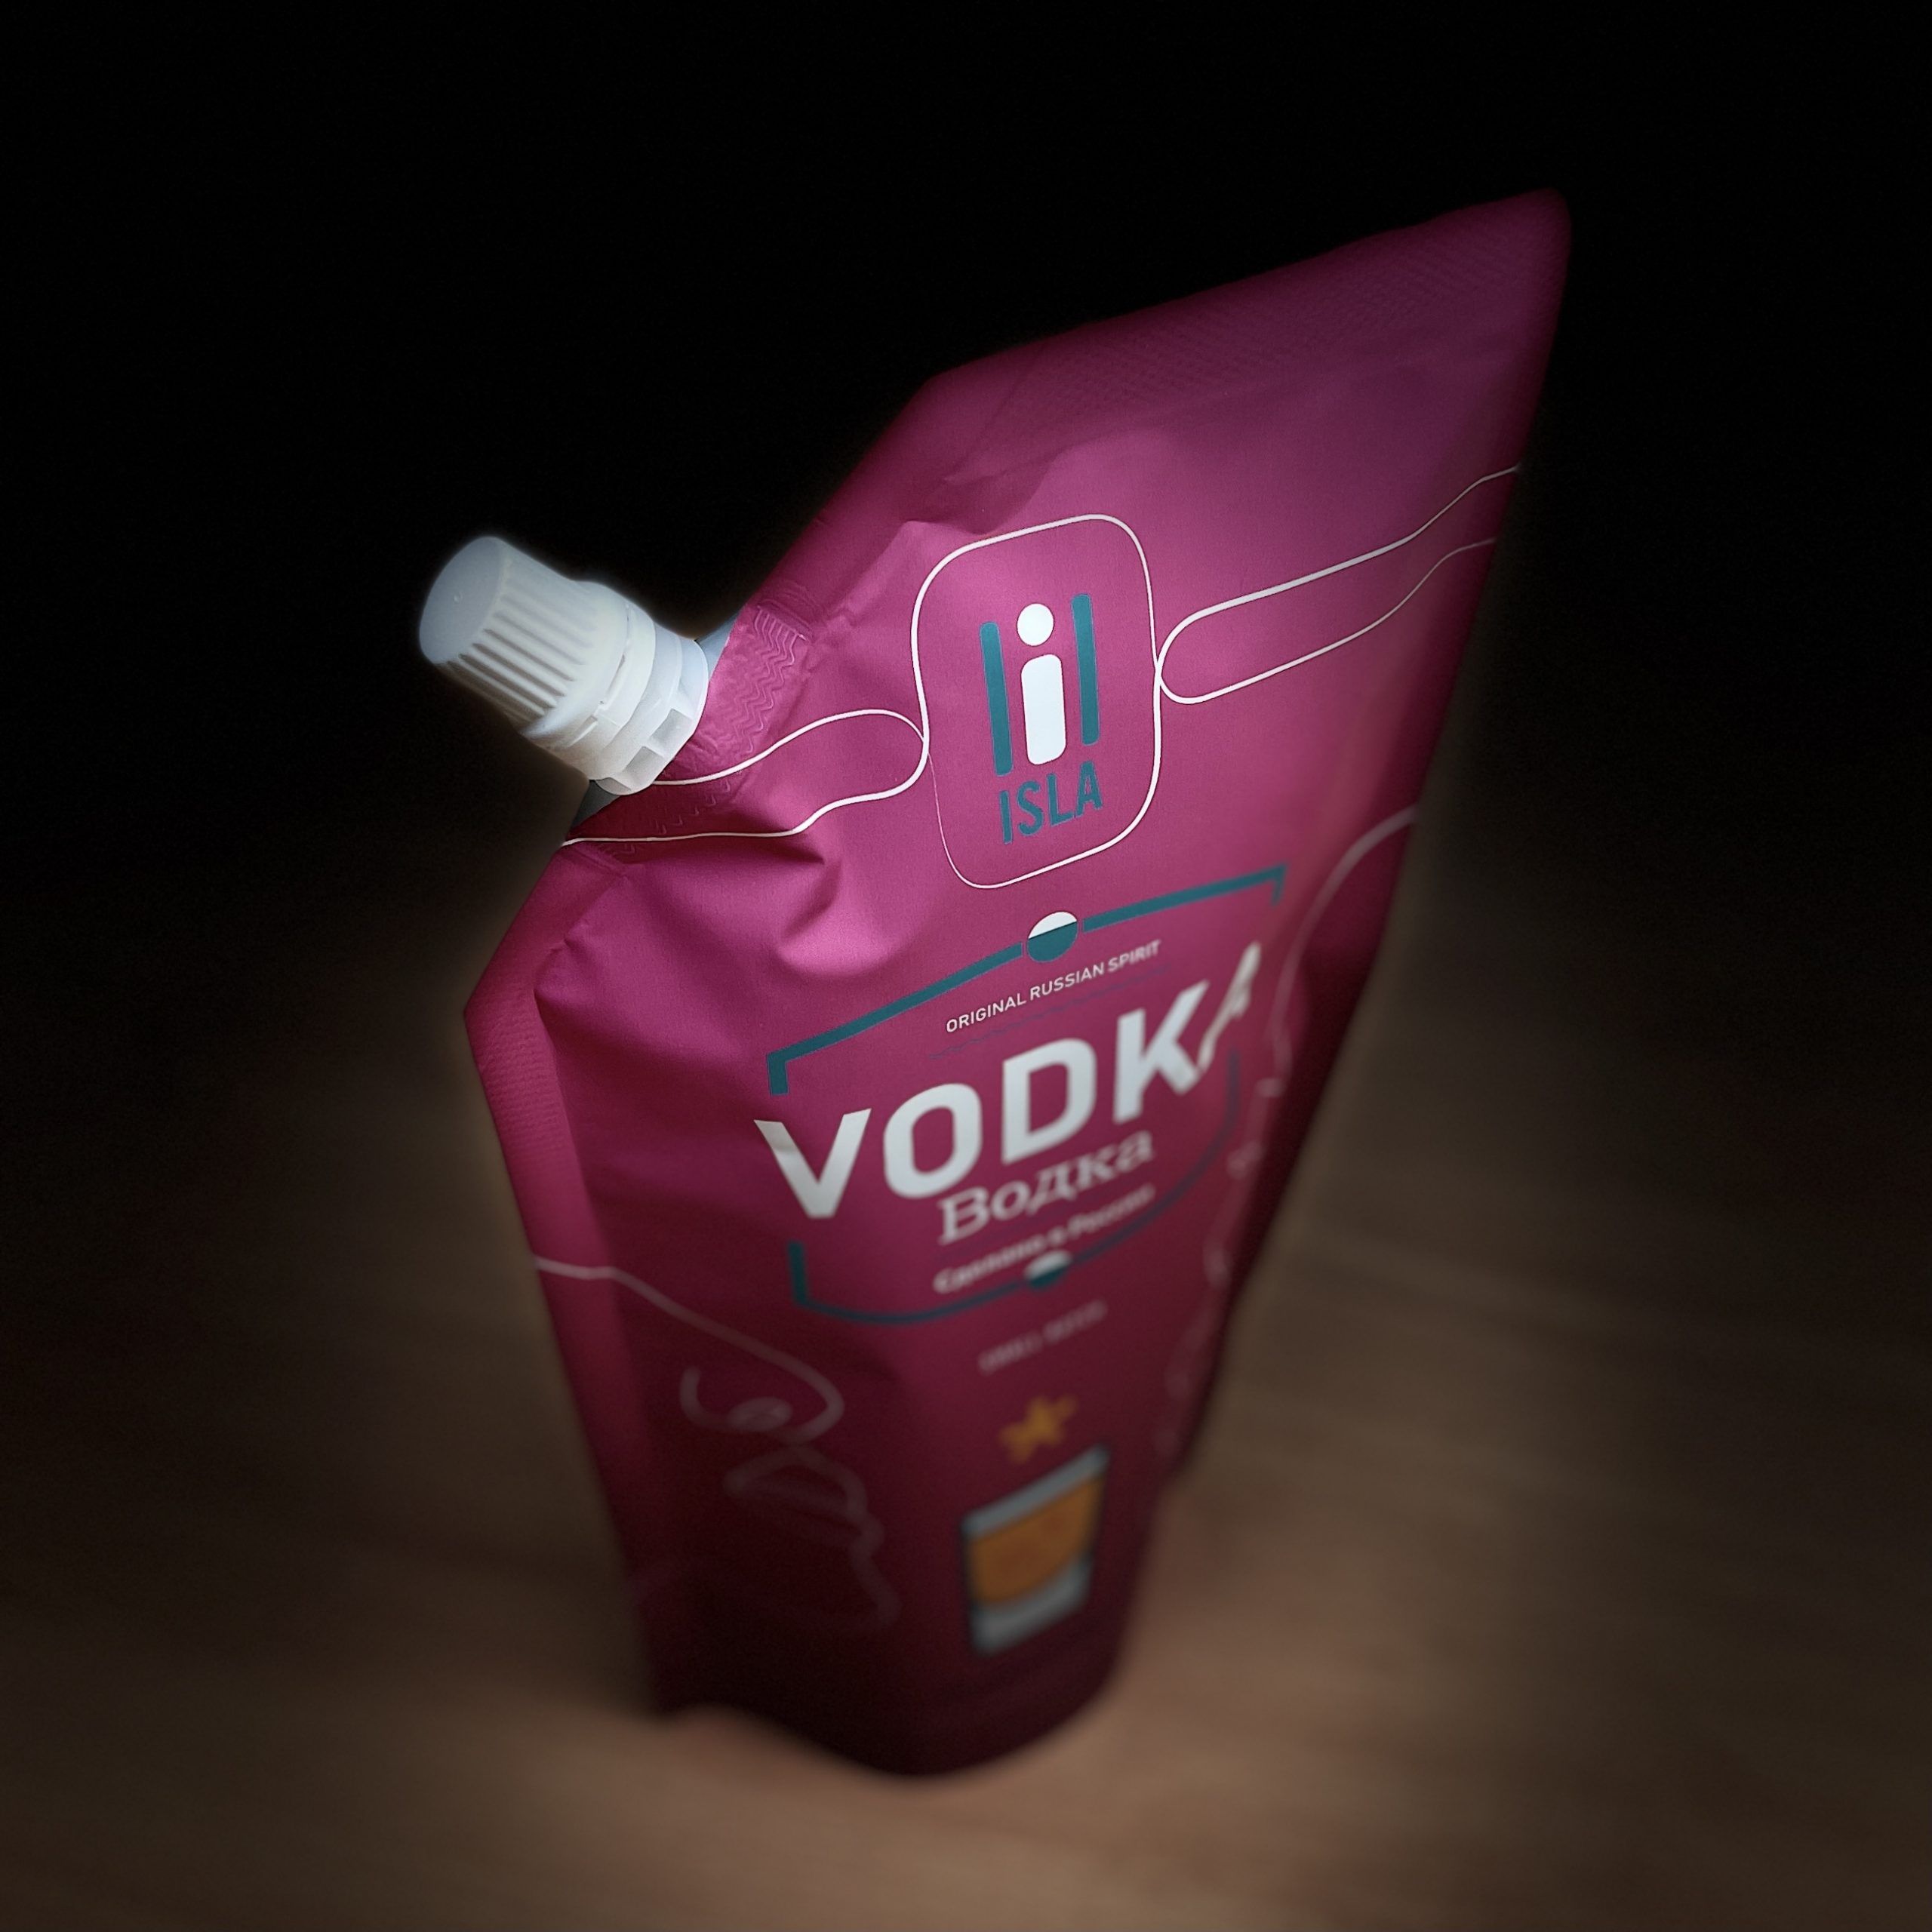 Vodka in a spouted pouch